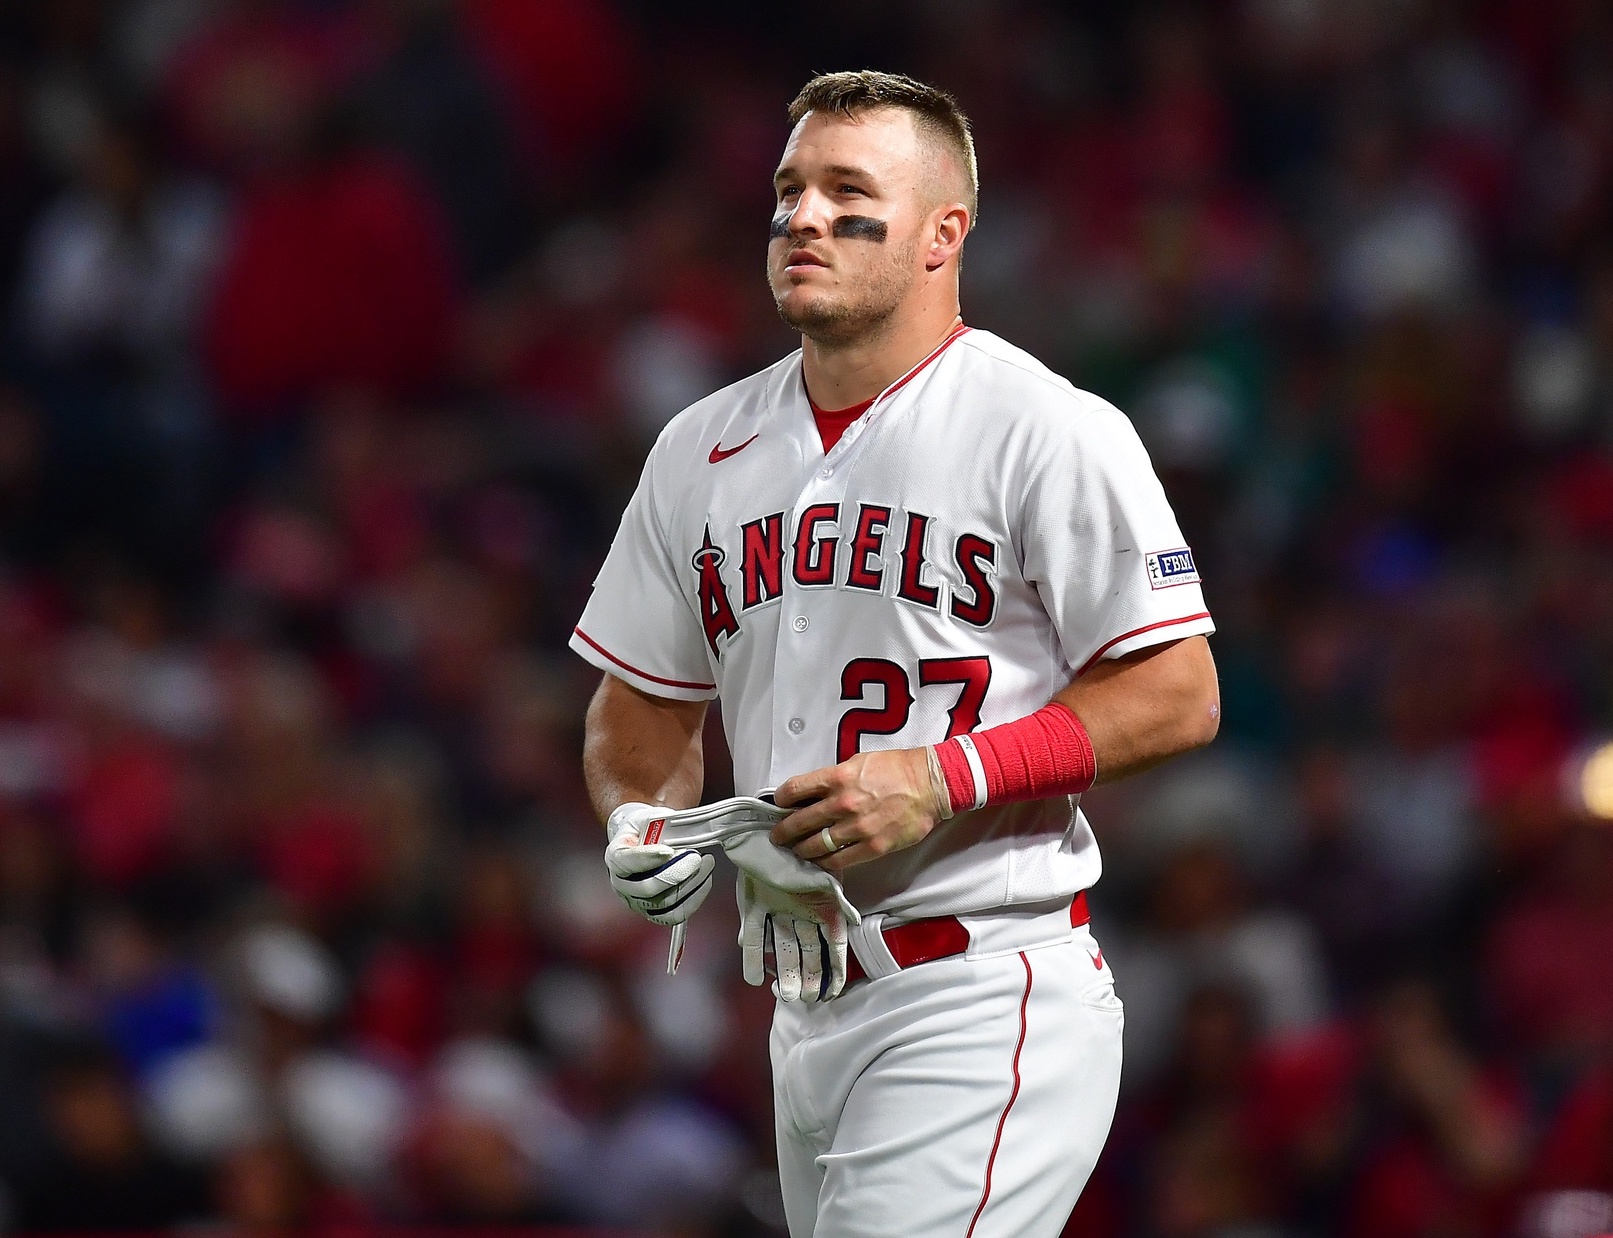 Angels Say They Will Listen to Trade Offers for Mike Trout - Stadium